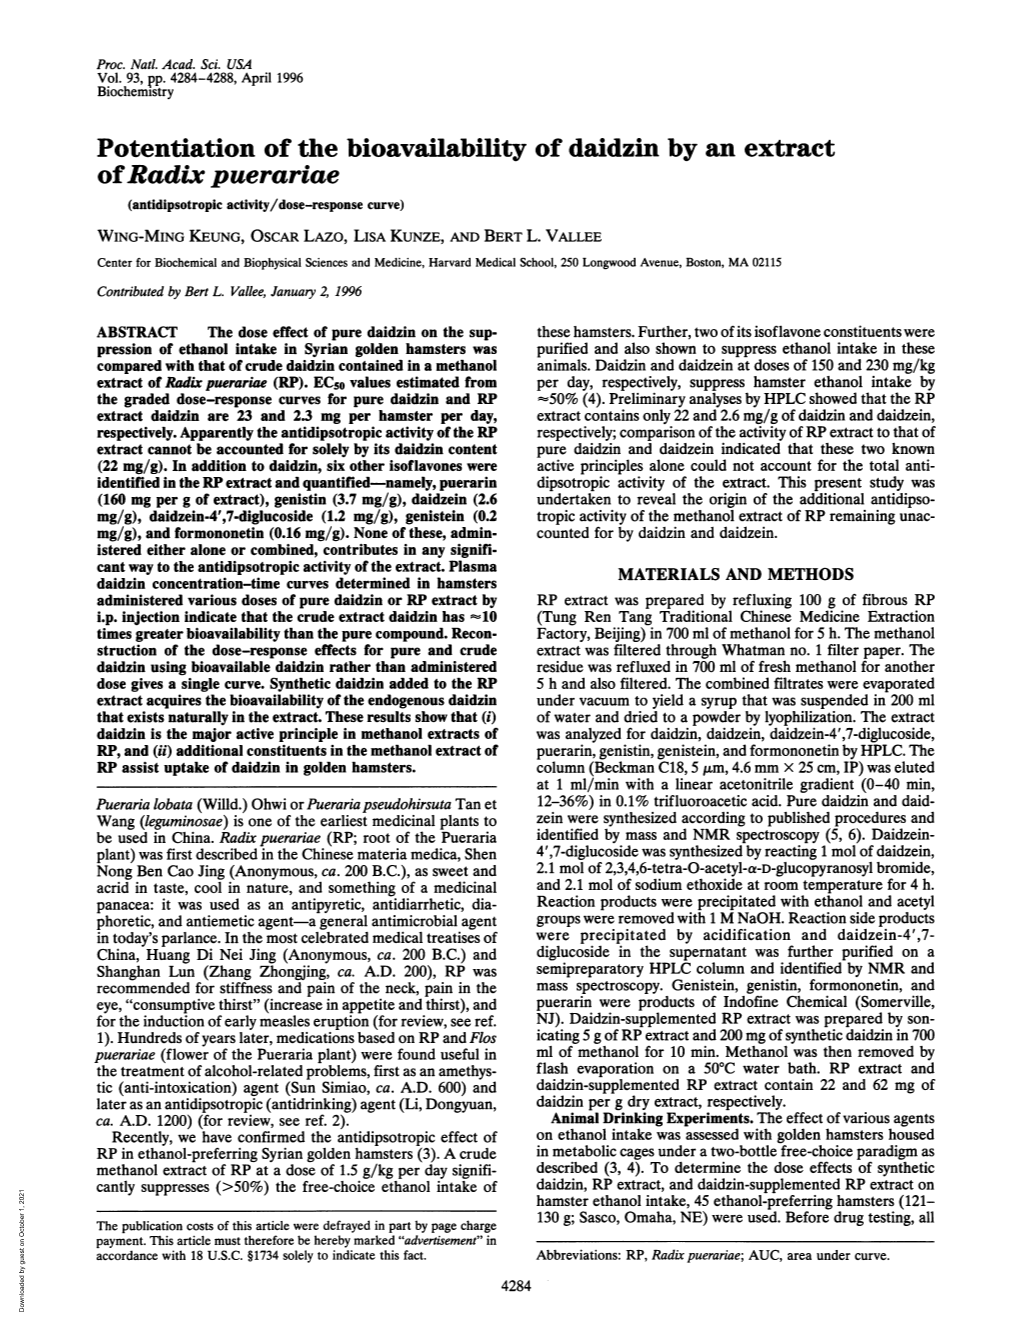 Potentiation of the Bioavailability of Daidzin by an Extract Ofradix